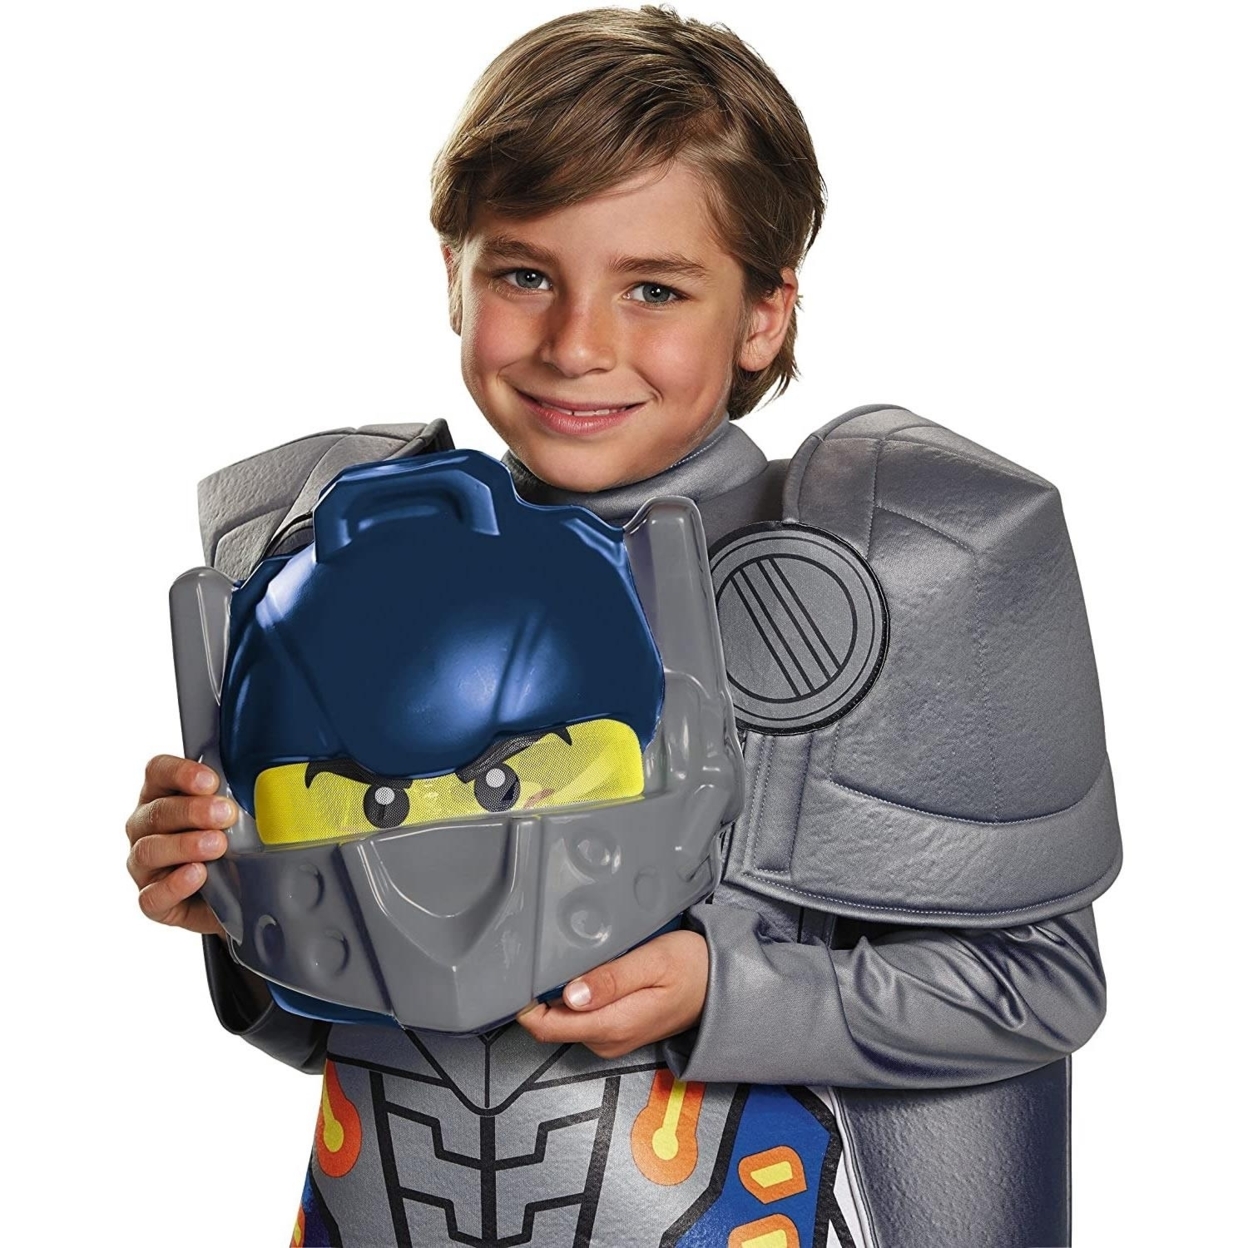 Lego Clay Nexo Knights Deluxe Boys Size S 4/6 Costume Shoulder Armor Pants Cartoon Characters Disguise